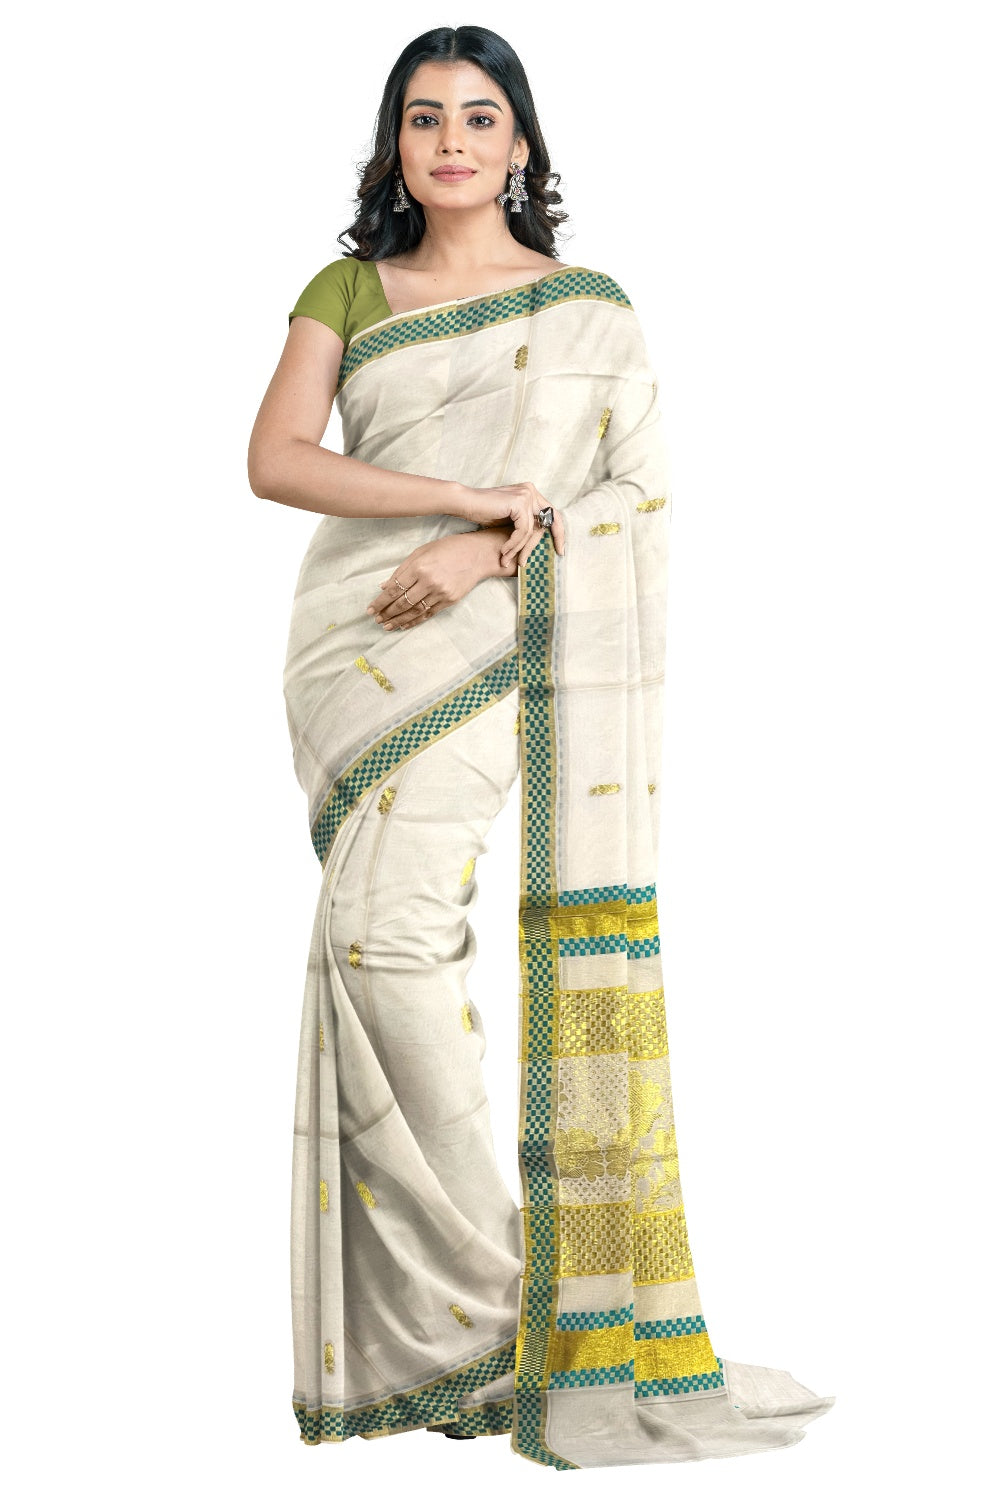 Pure Cotton Kerala Saree with Kasavu Woven Floral Patterns on Body and Turquoise Golden Border